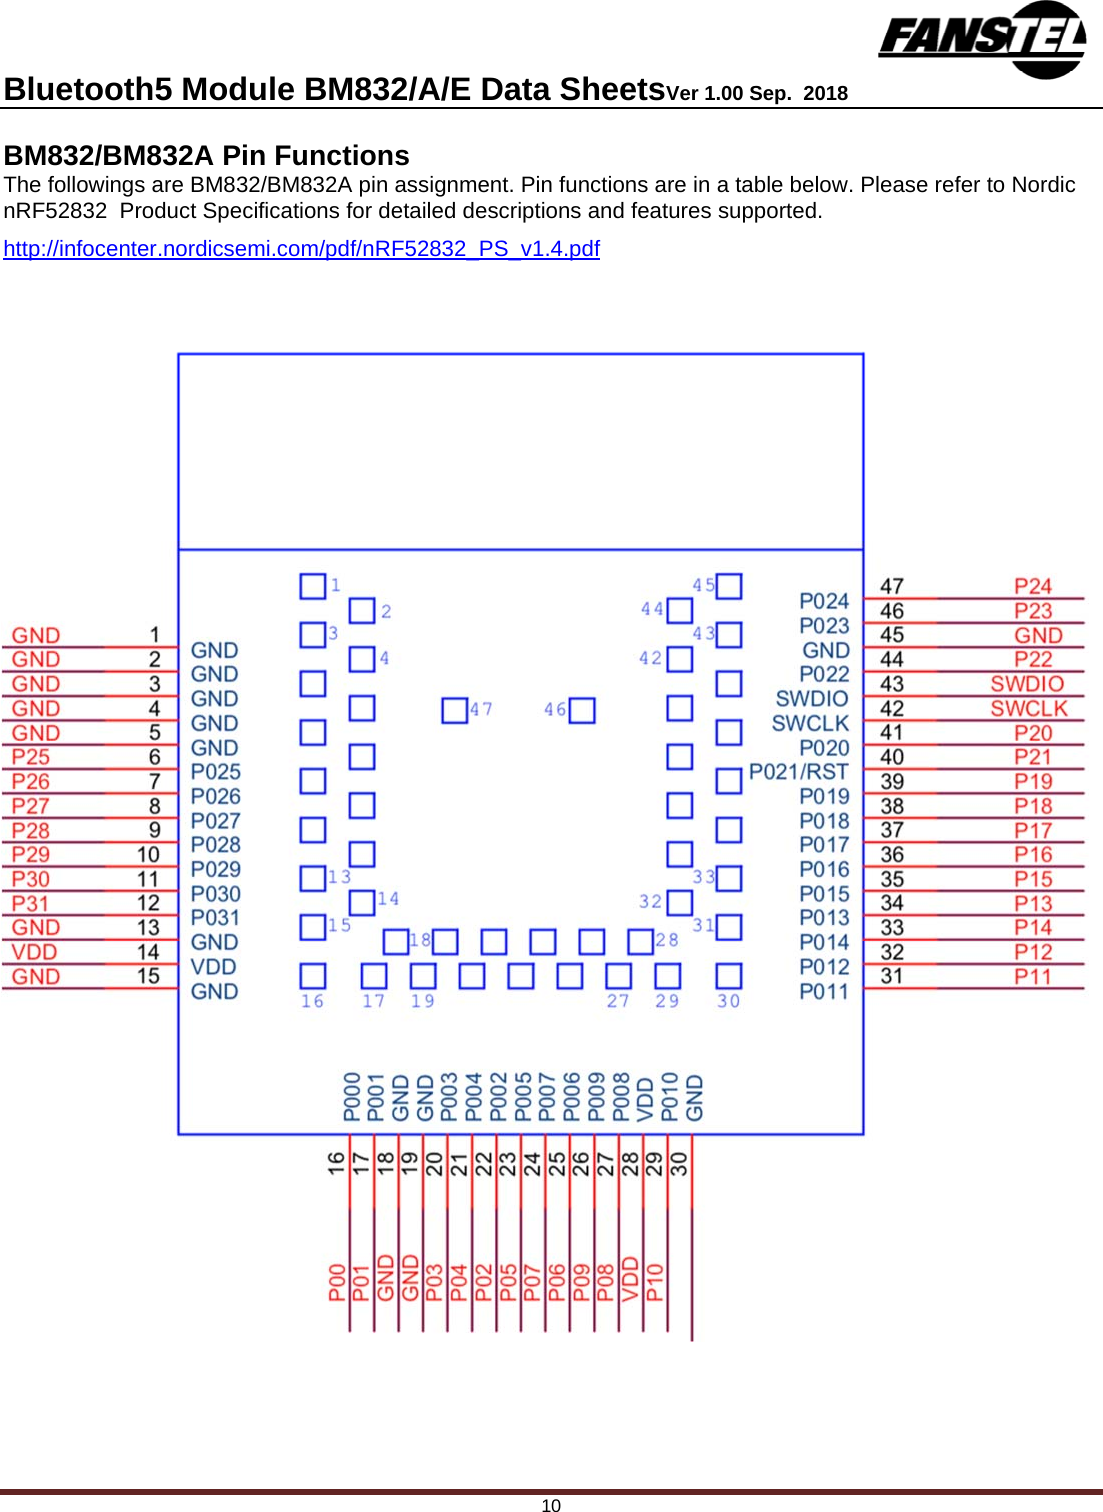 Bluetooth5 Module BM832/A/E Data SheetsVer 1.00 Sep.  2018 10 BM832/BM832A Pin Functions The followings are BM832/BM832A pin assignment. Pin functions are in a table below. Please refer to Nordic nRF52832  Product Specifications for detailed descriptions and features supported.  http://infocenter.nordicsemi.com/pdf/nRF52832_PS_v1.4.pdf     